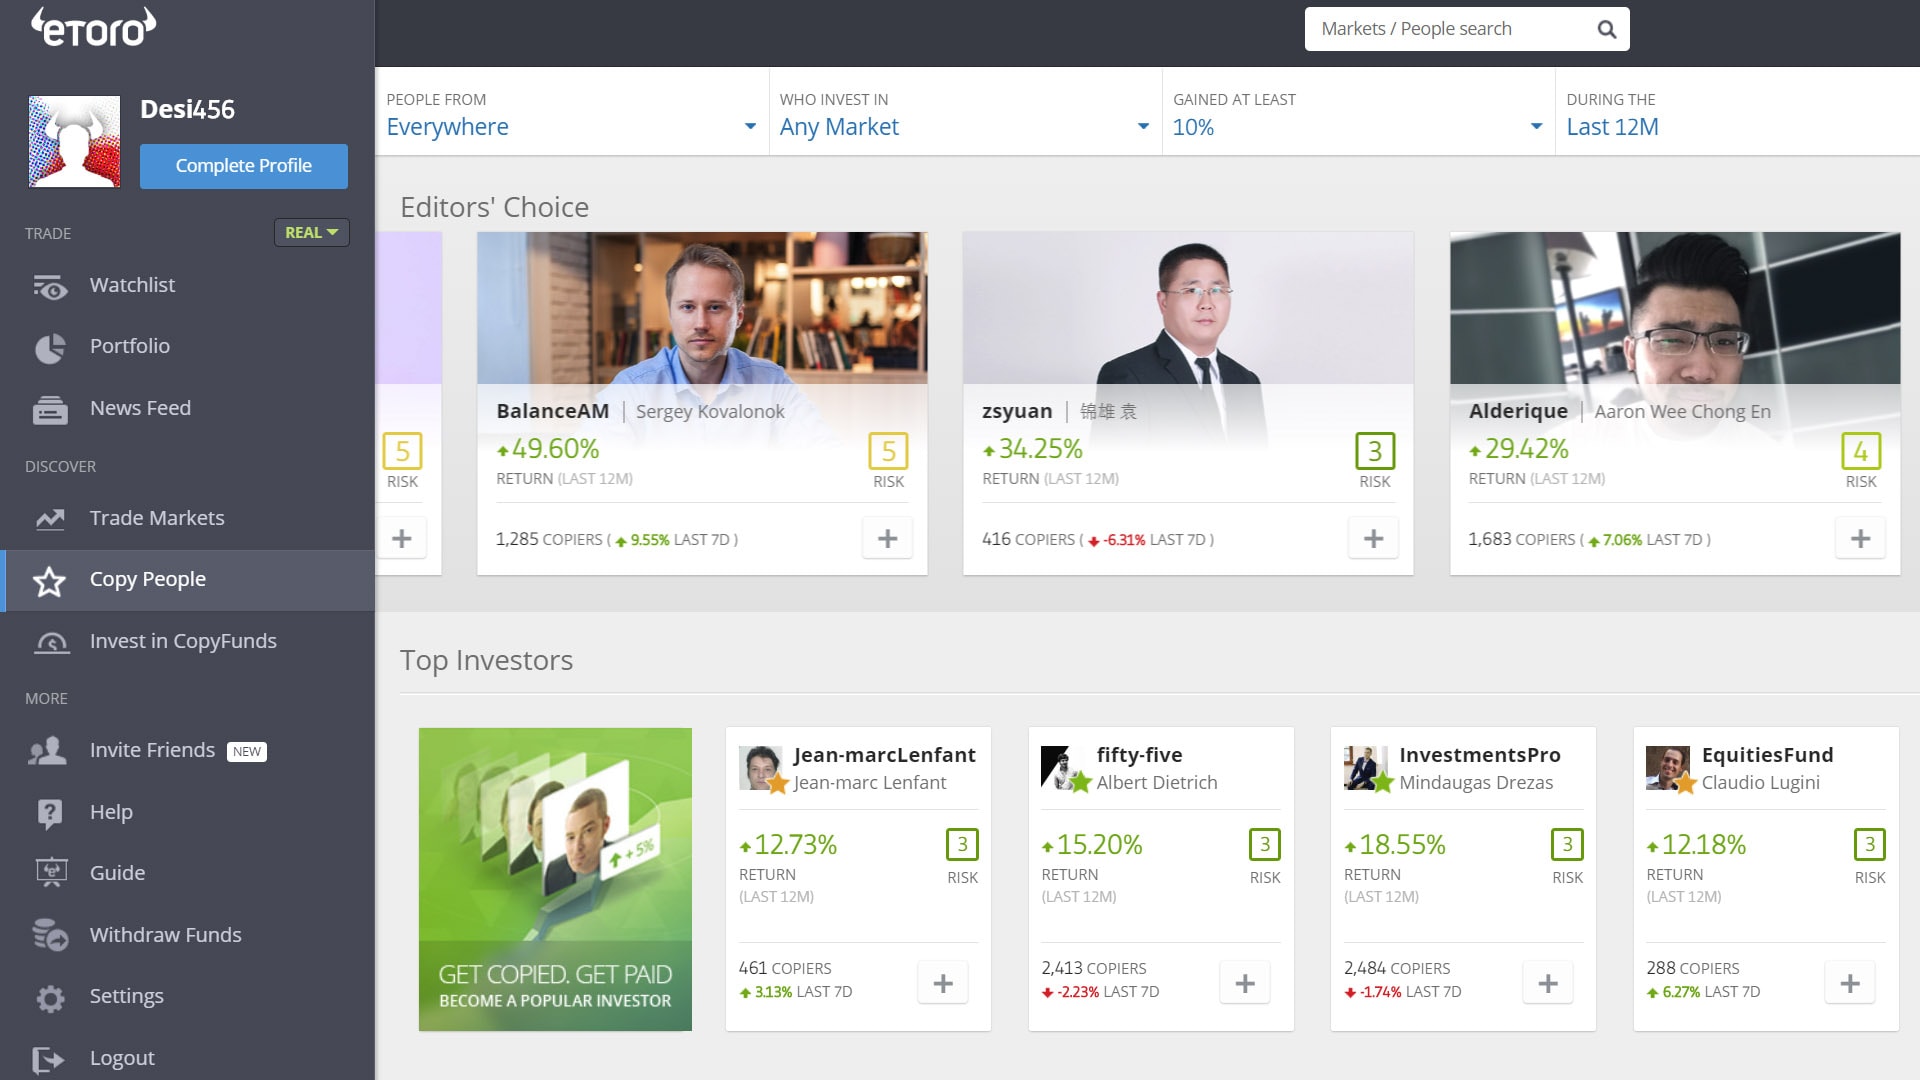 eToro Review - Here is what to expect from the Broker